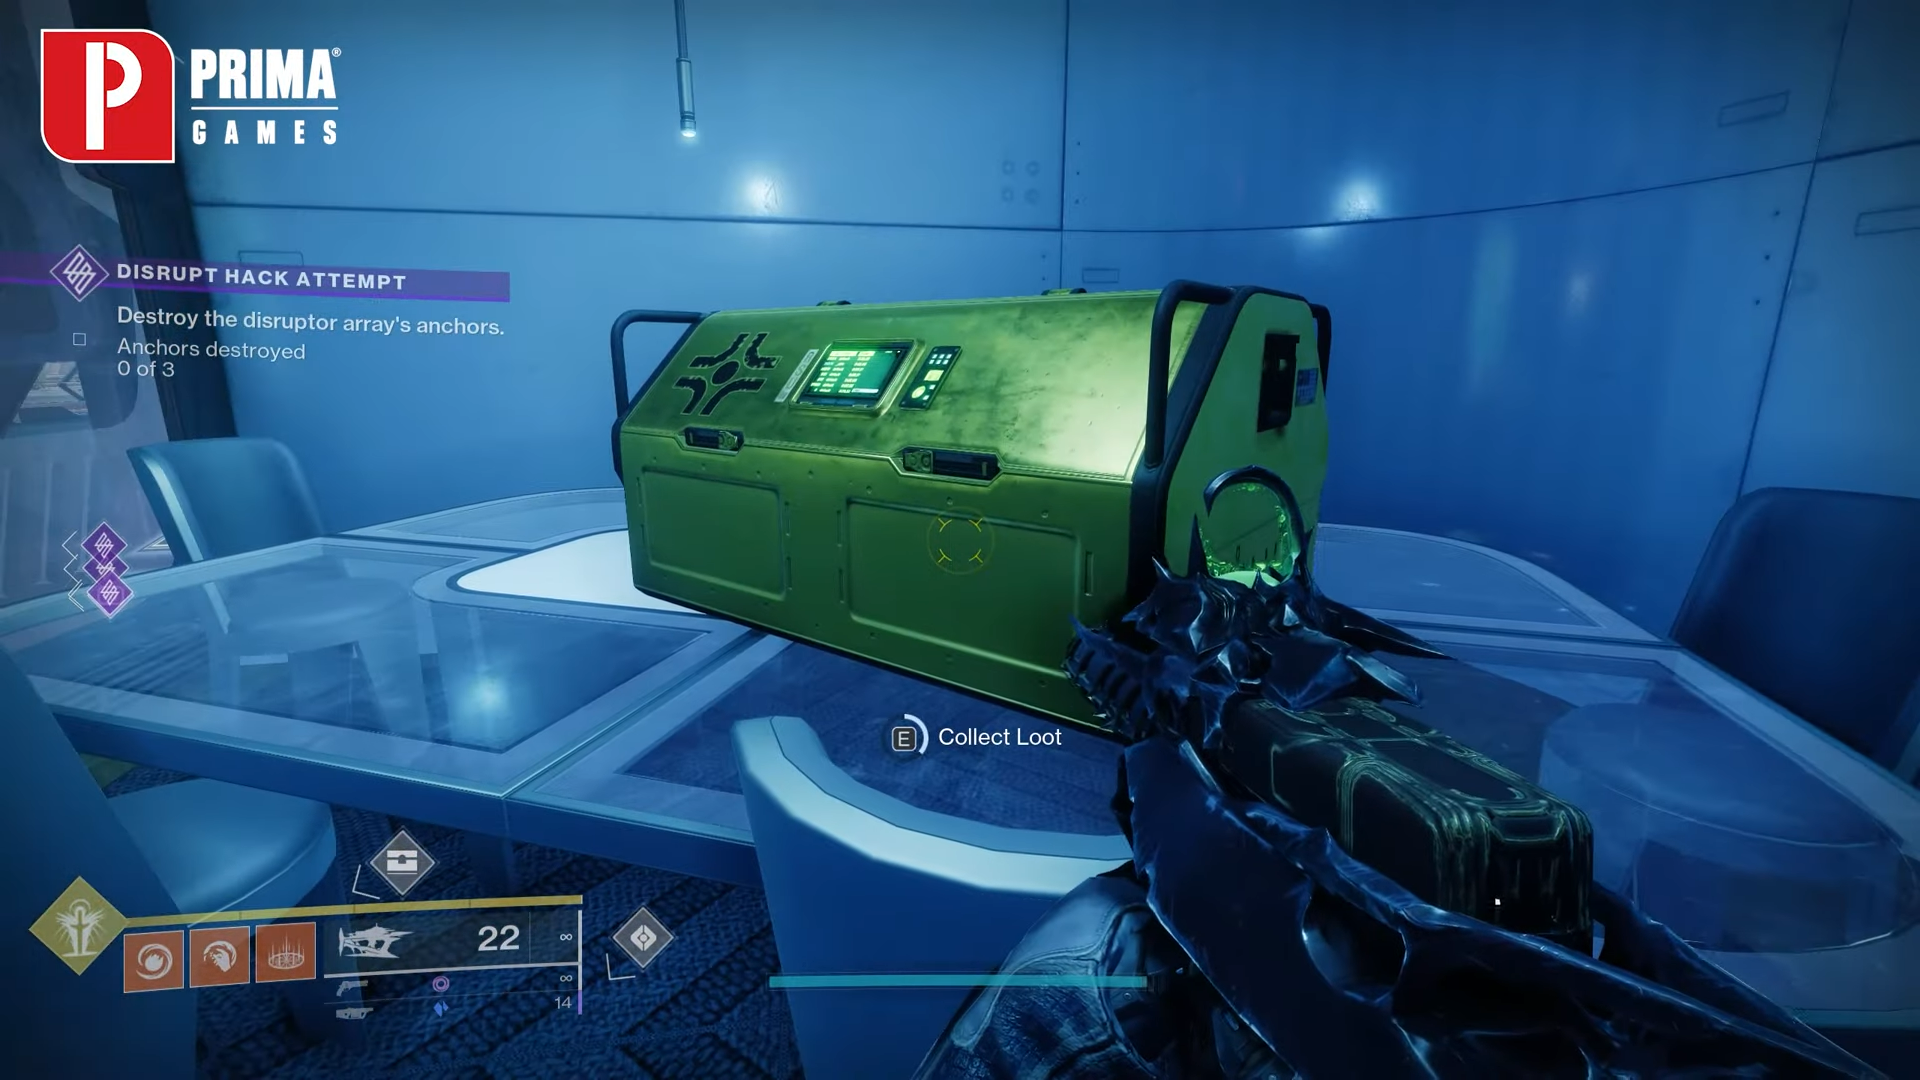 How to Get All Zephyr Concourse Region Chests on Neomuna in Destiny 2 -  Prima Games